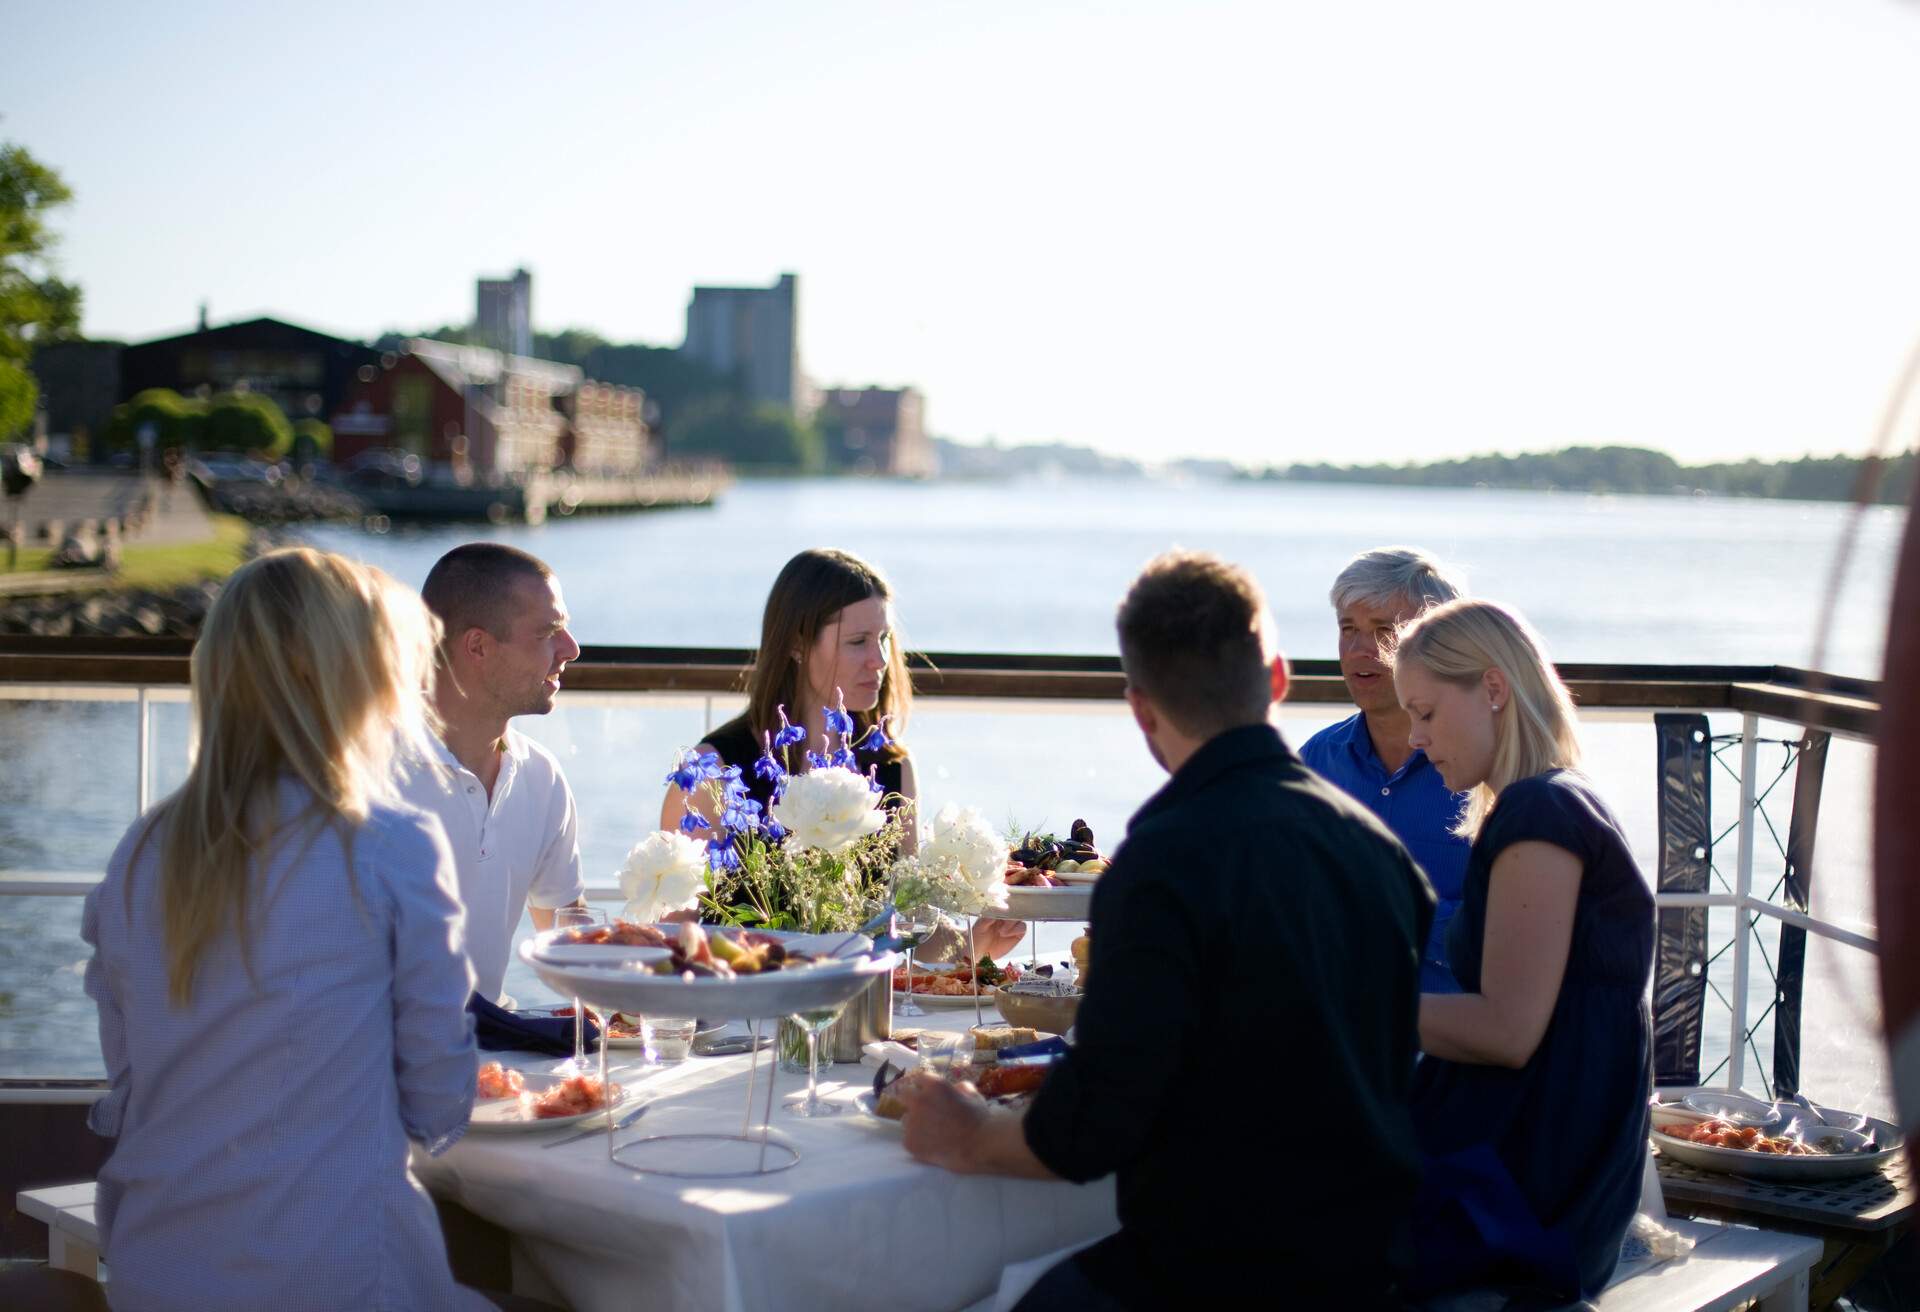 Group of friends dining al fresco on a balcony with a view of the lake.